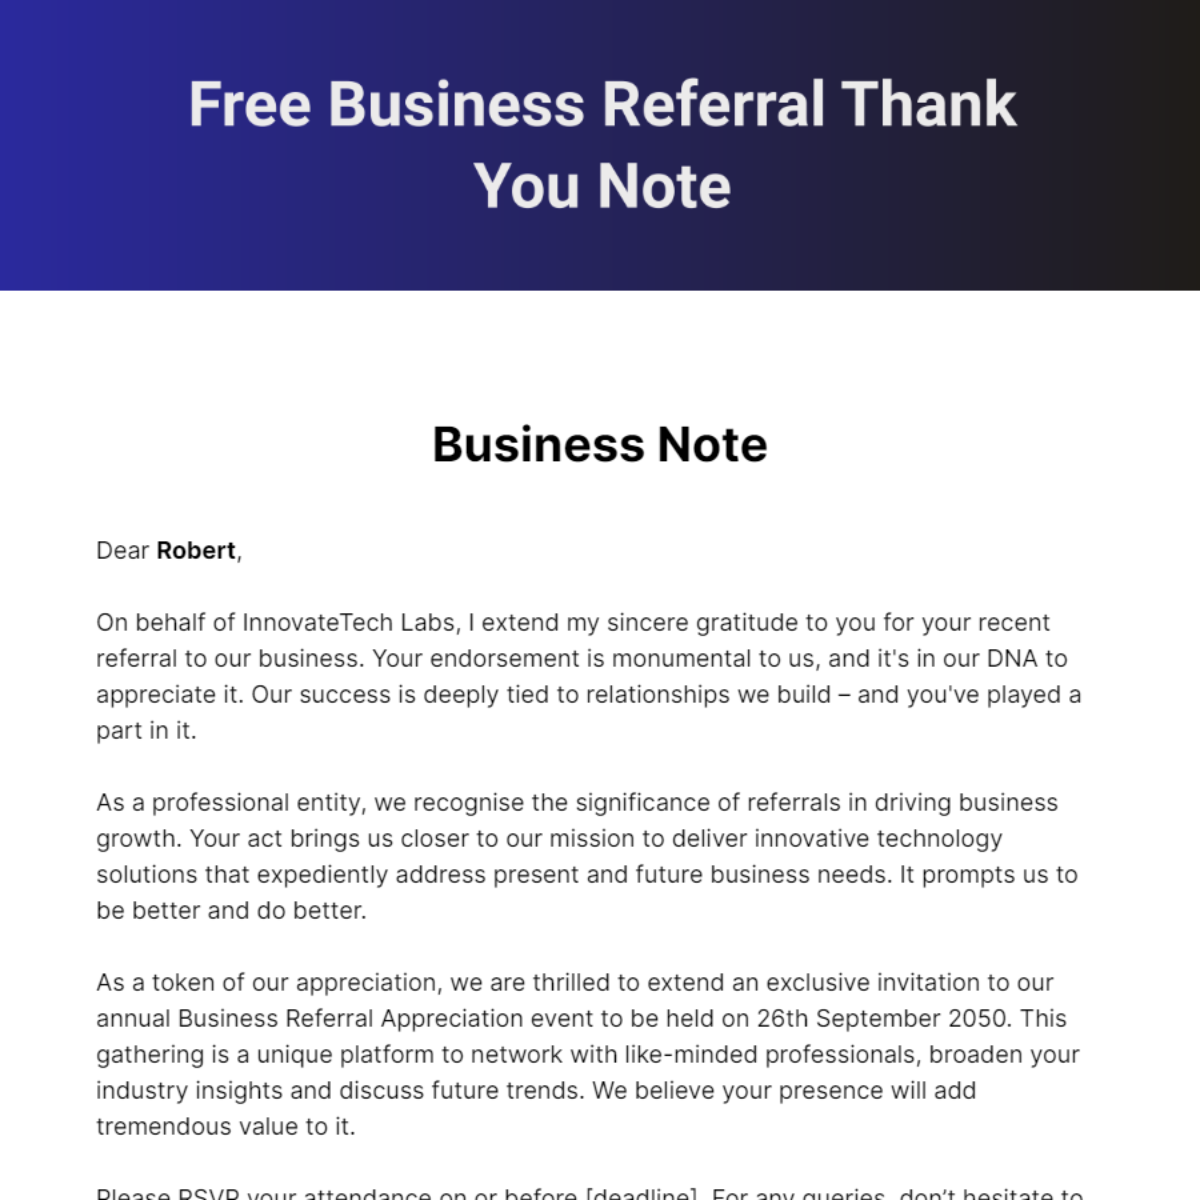 Business Referral Thank you Note Template